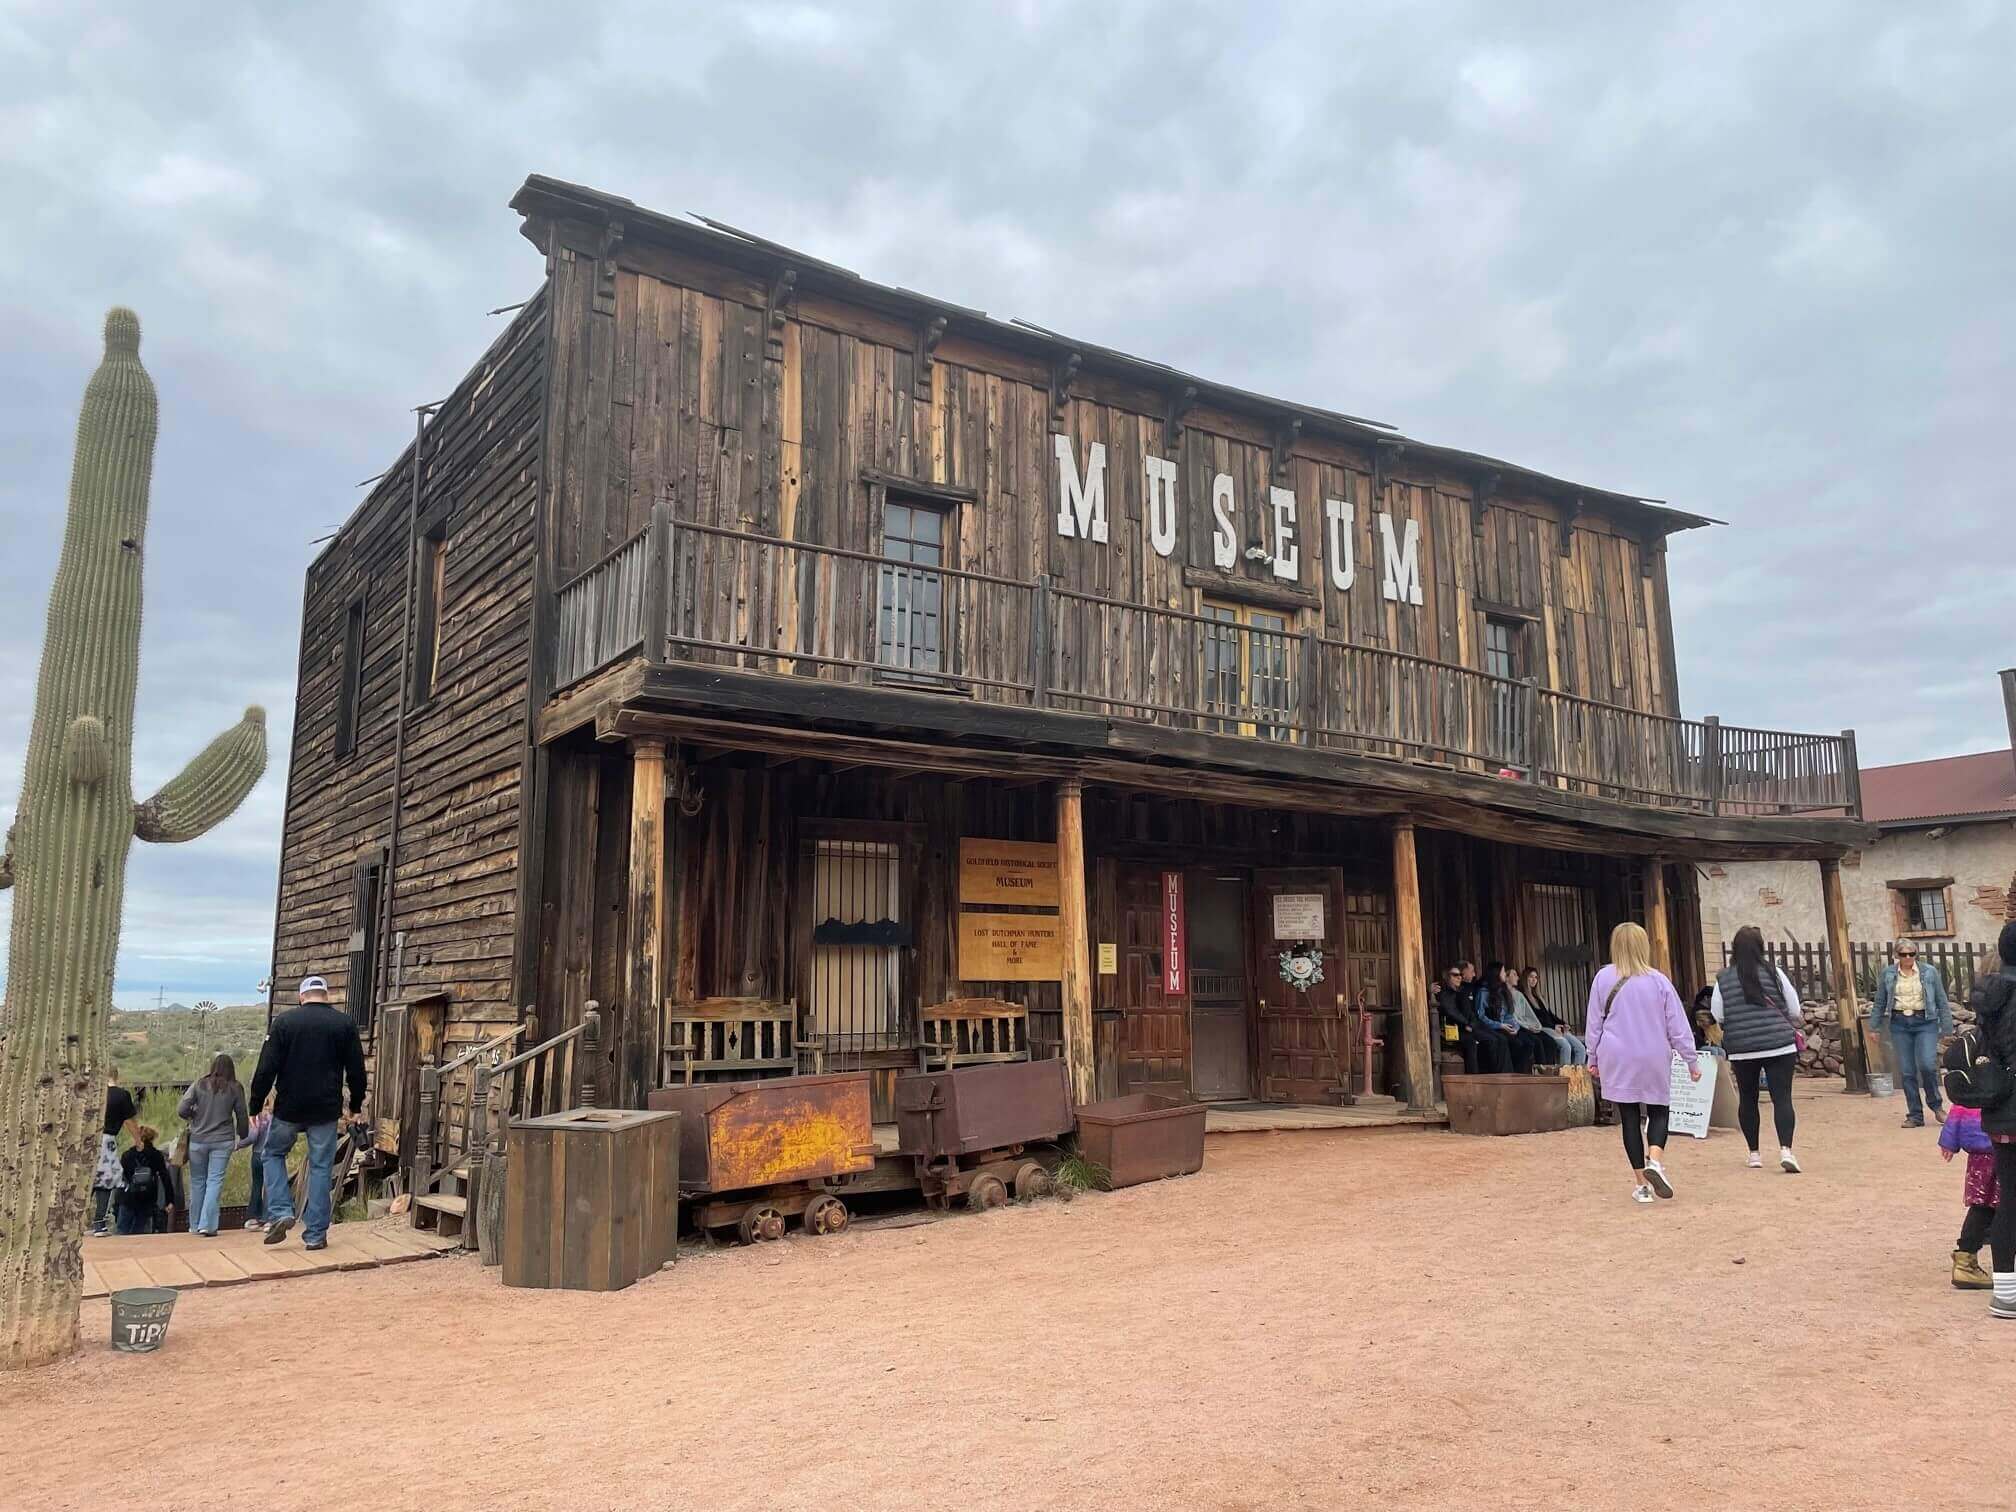 The Goldfield History Museum stands alongside cacti, a popular day trip destination from Phoenix.